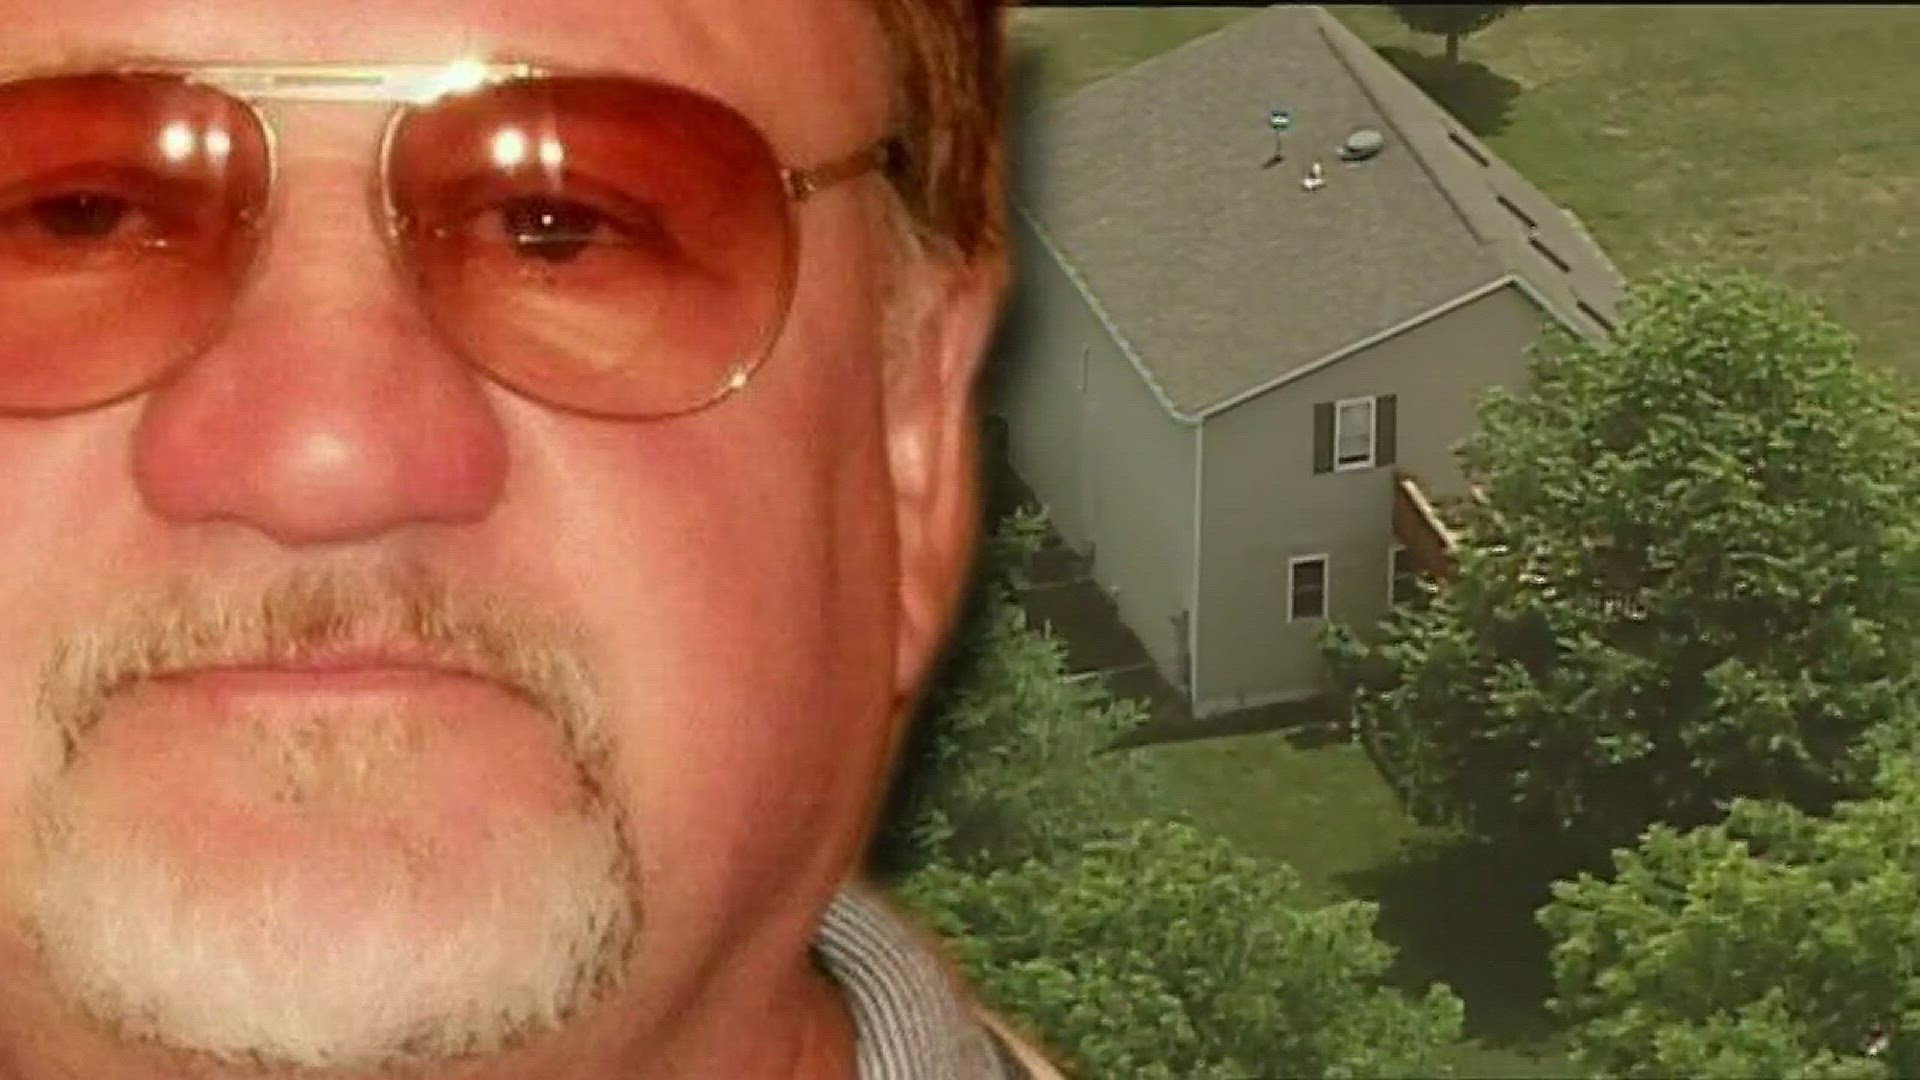 KHOU 11 Investigates found James Thomas Hodgkinson, the only casualty in Wednesday's shooting during practice for a congressional baseball game in Virginia, left a trail of clues behind.